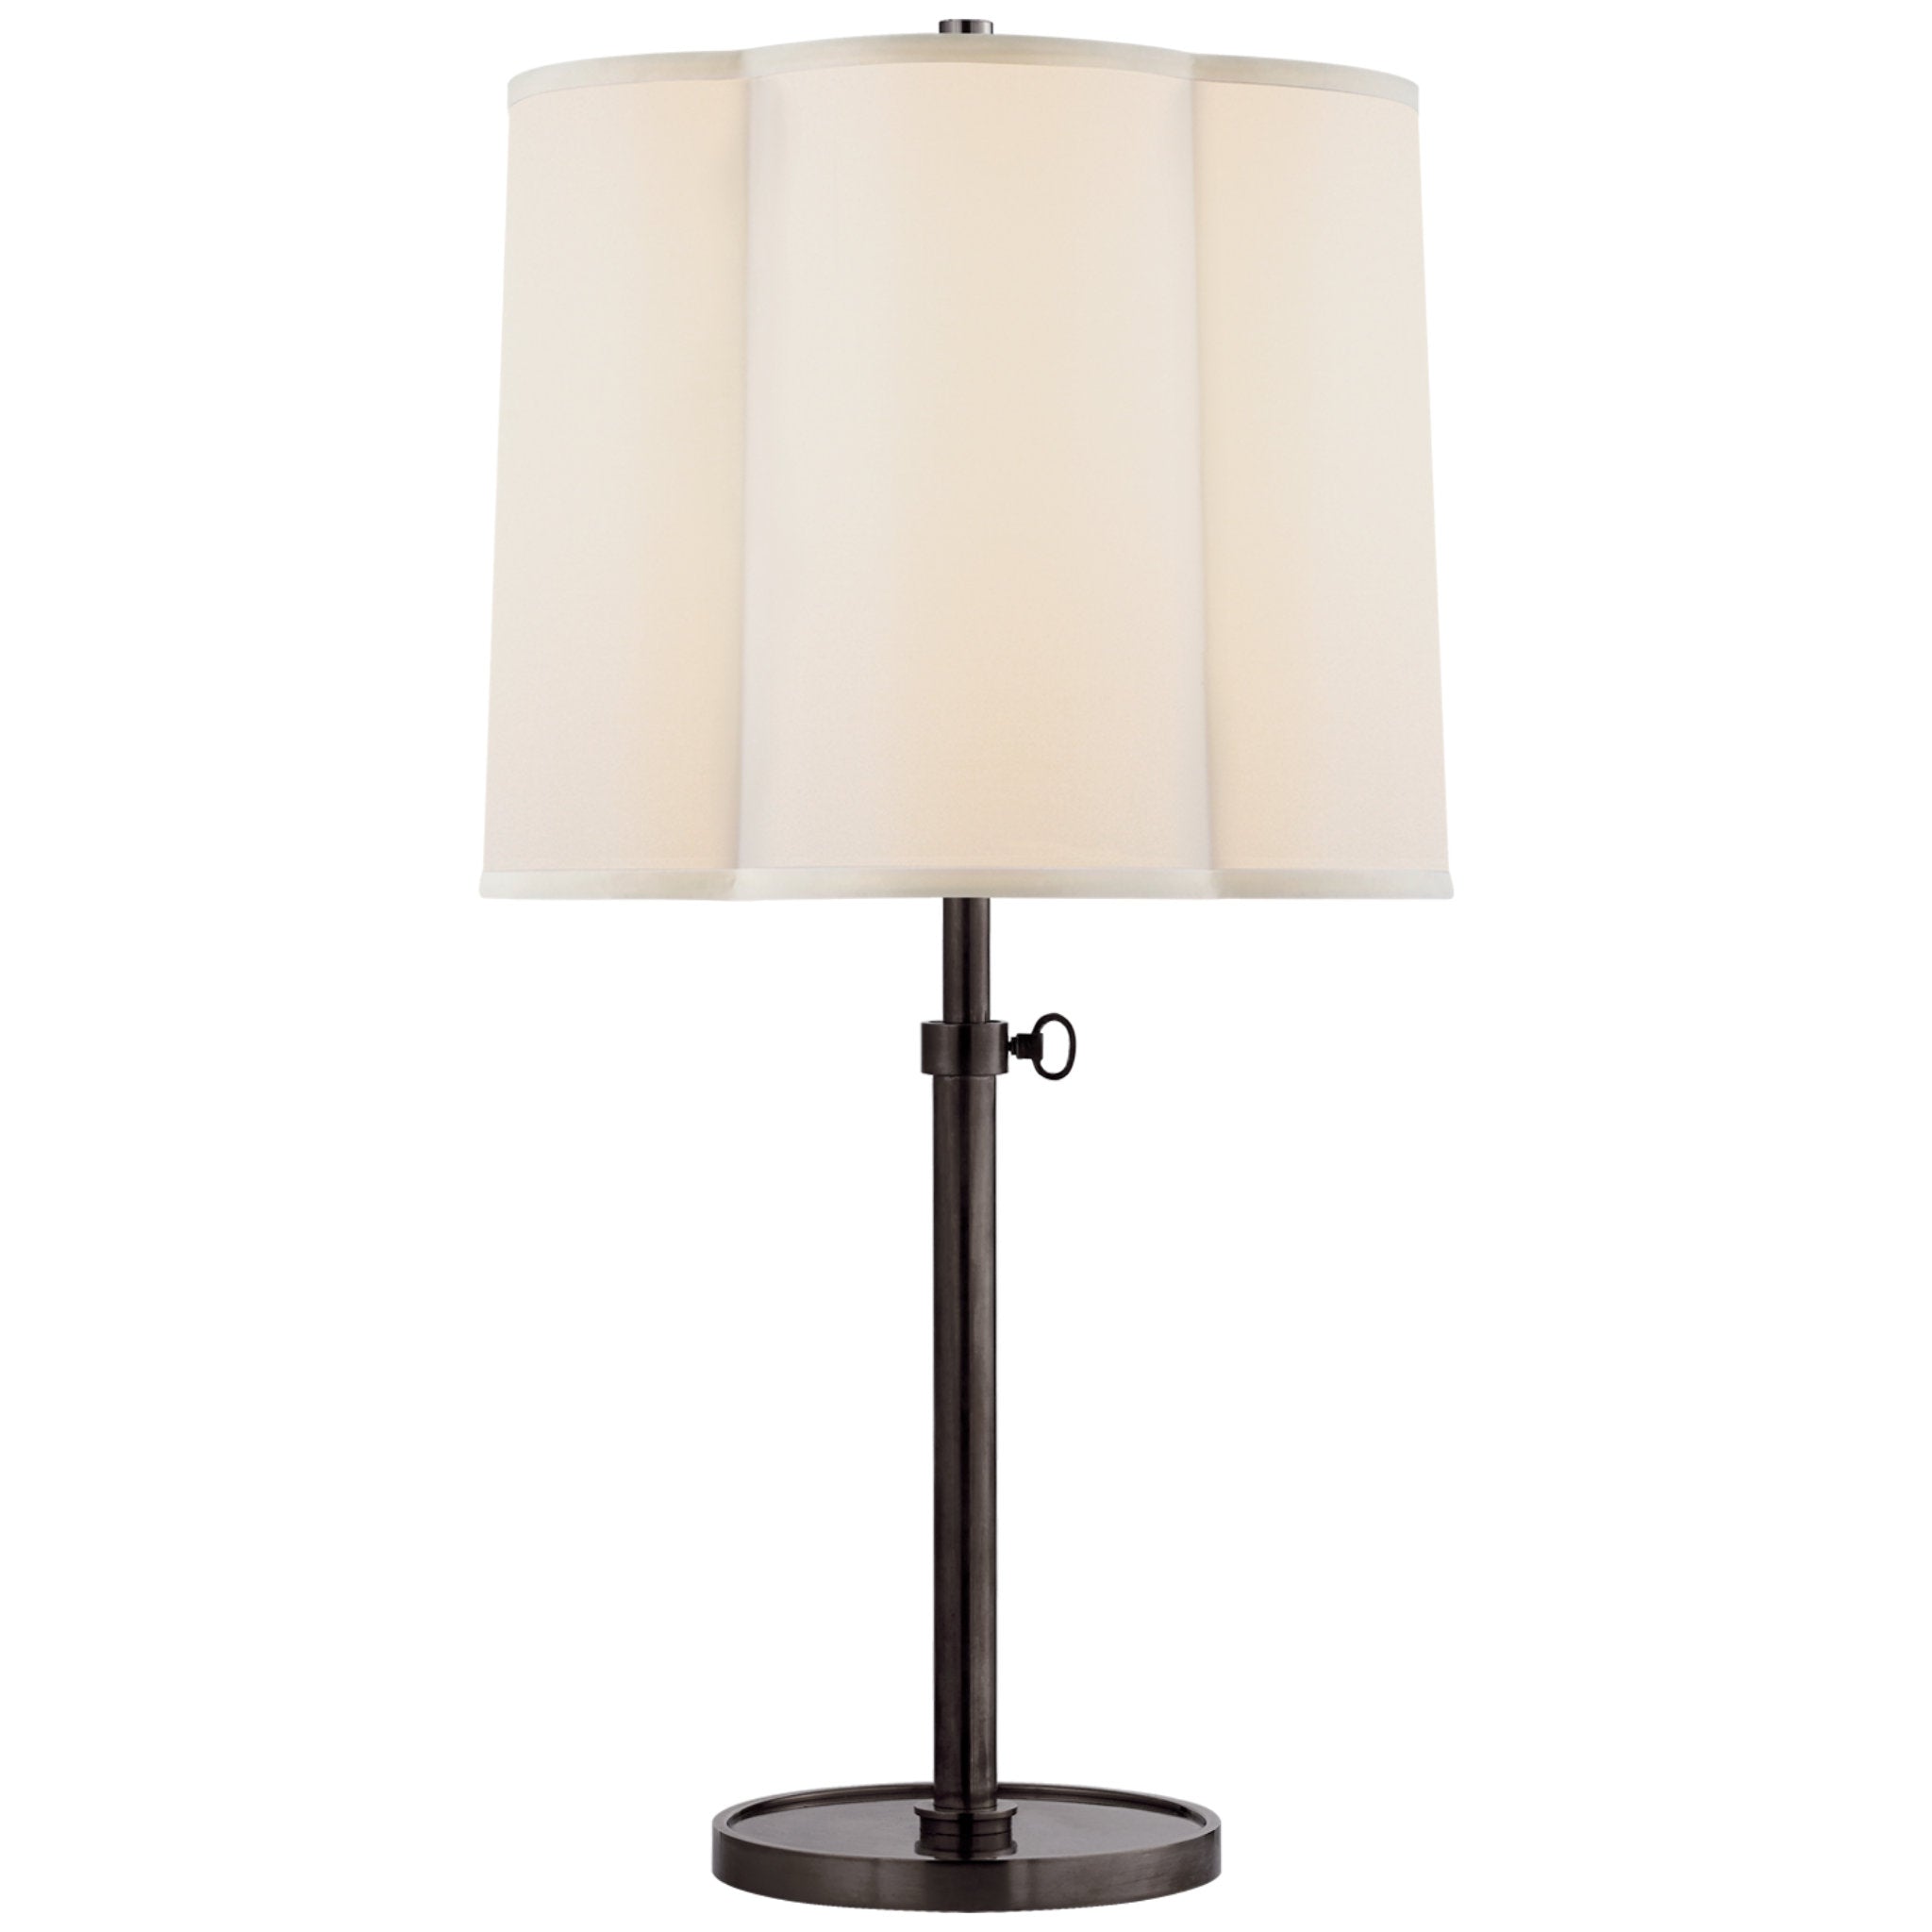 Barbara Barry Simple Adjustable Scallop Table Lamp in Bronze with Silk Shade